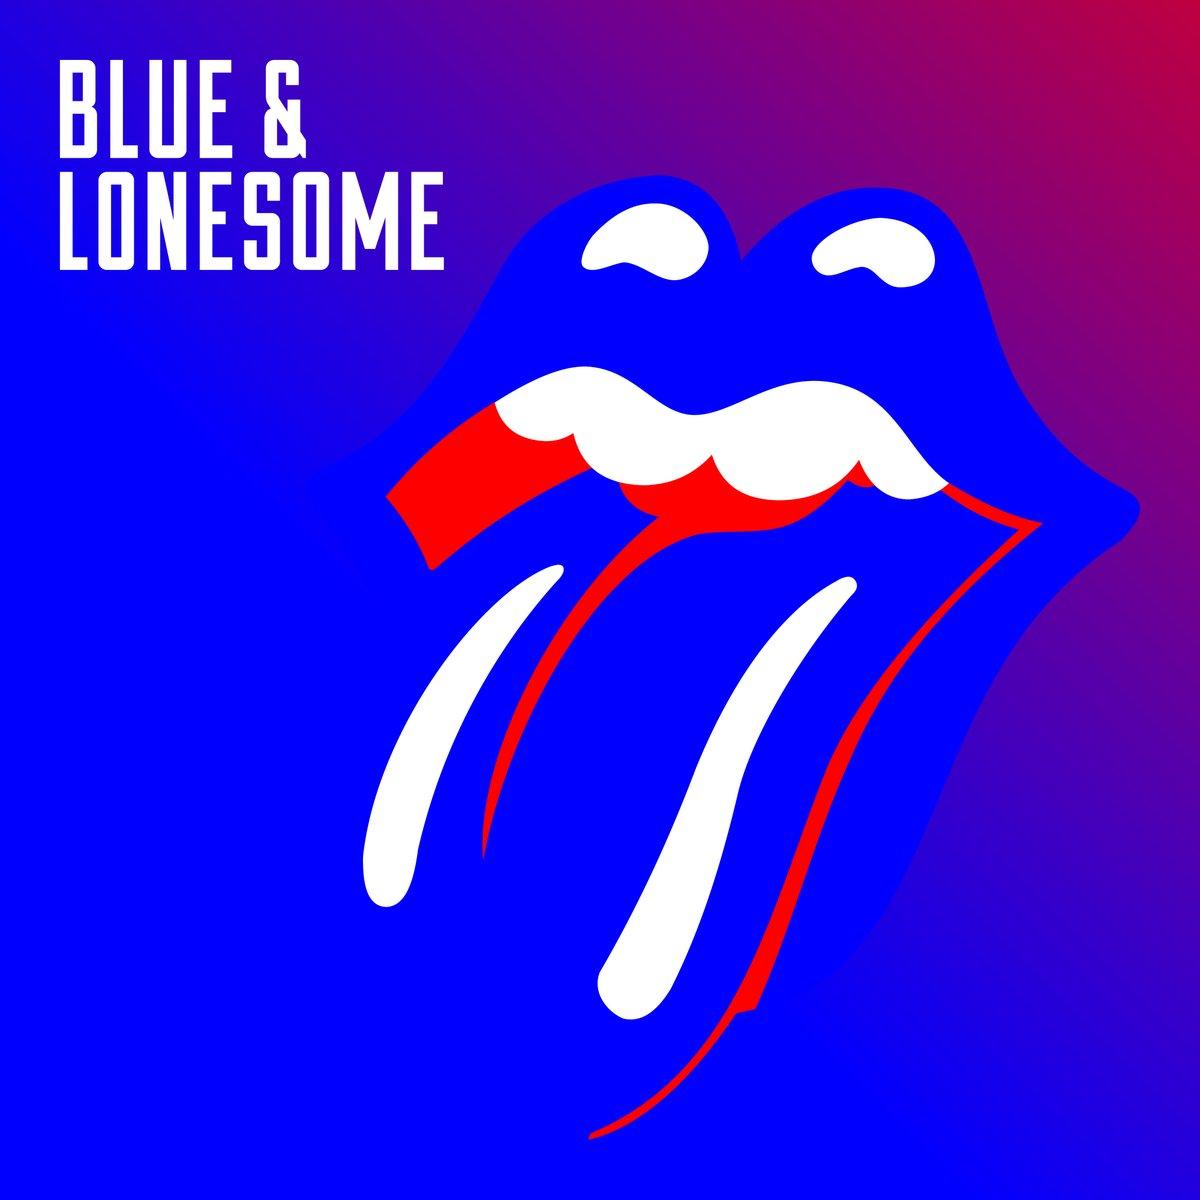 ROLLING STONES - BLUE AND LONESOME JEWEL (2017) CD